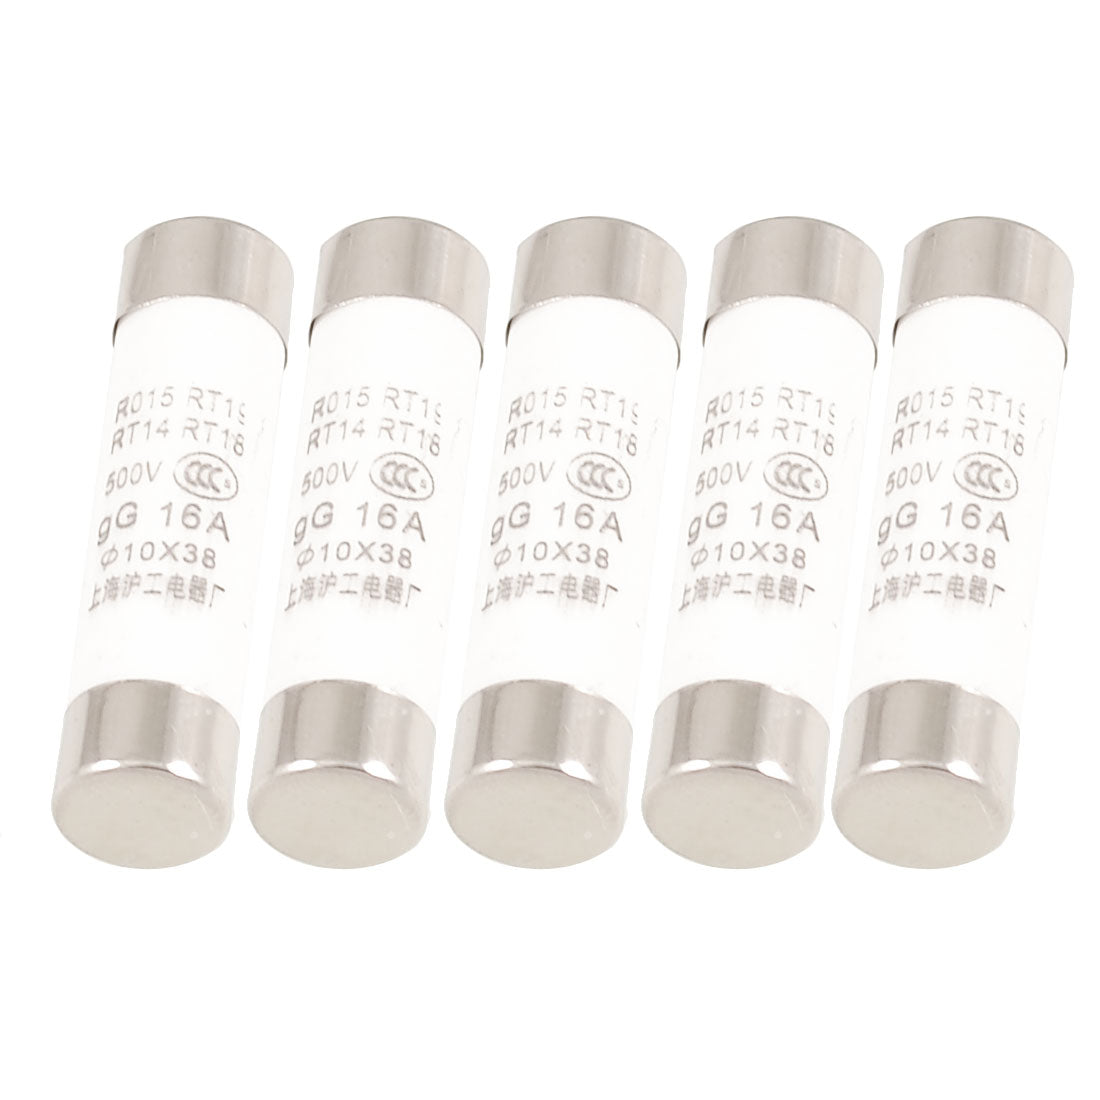 uxcell Uxcell 10mm x 38mm R015 RT19 RT14 RT18 gG 500V 16A Cylinder Caps Fuse Protectors 5 Pcs